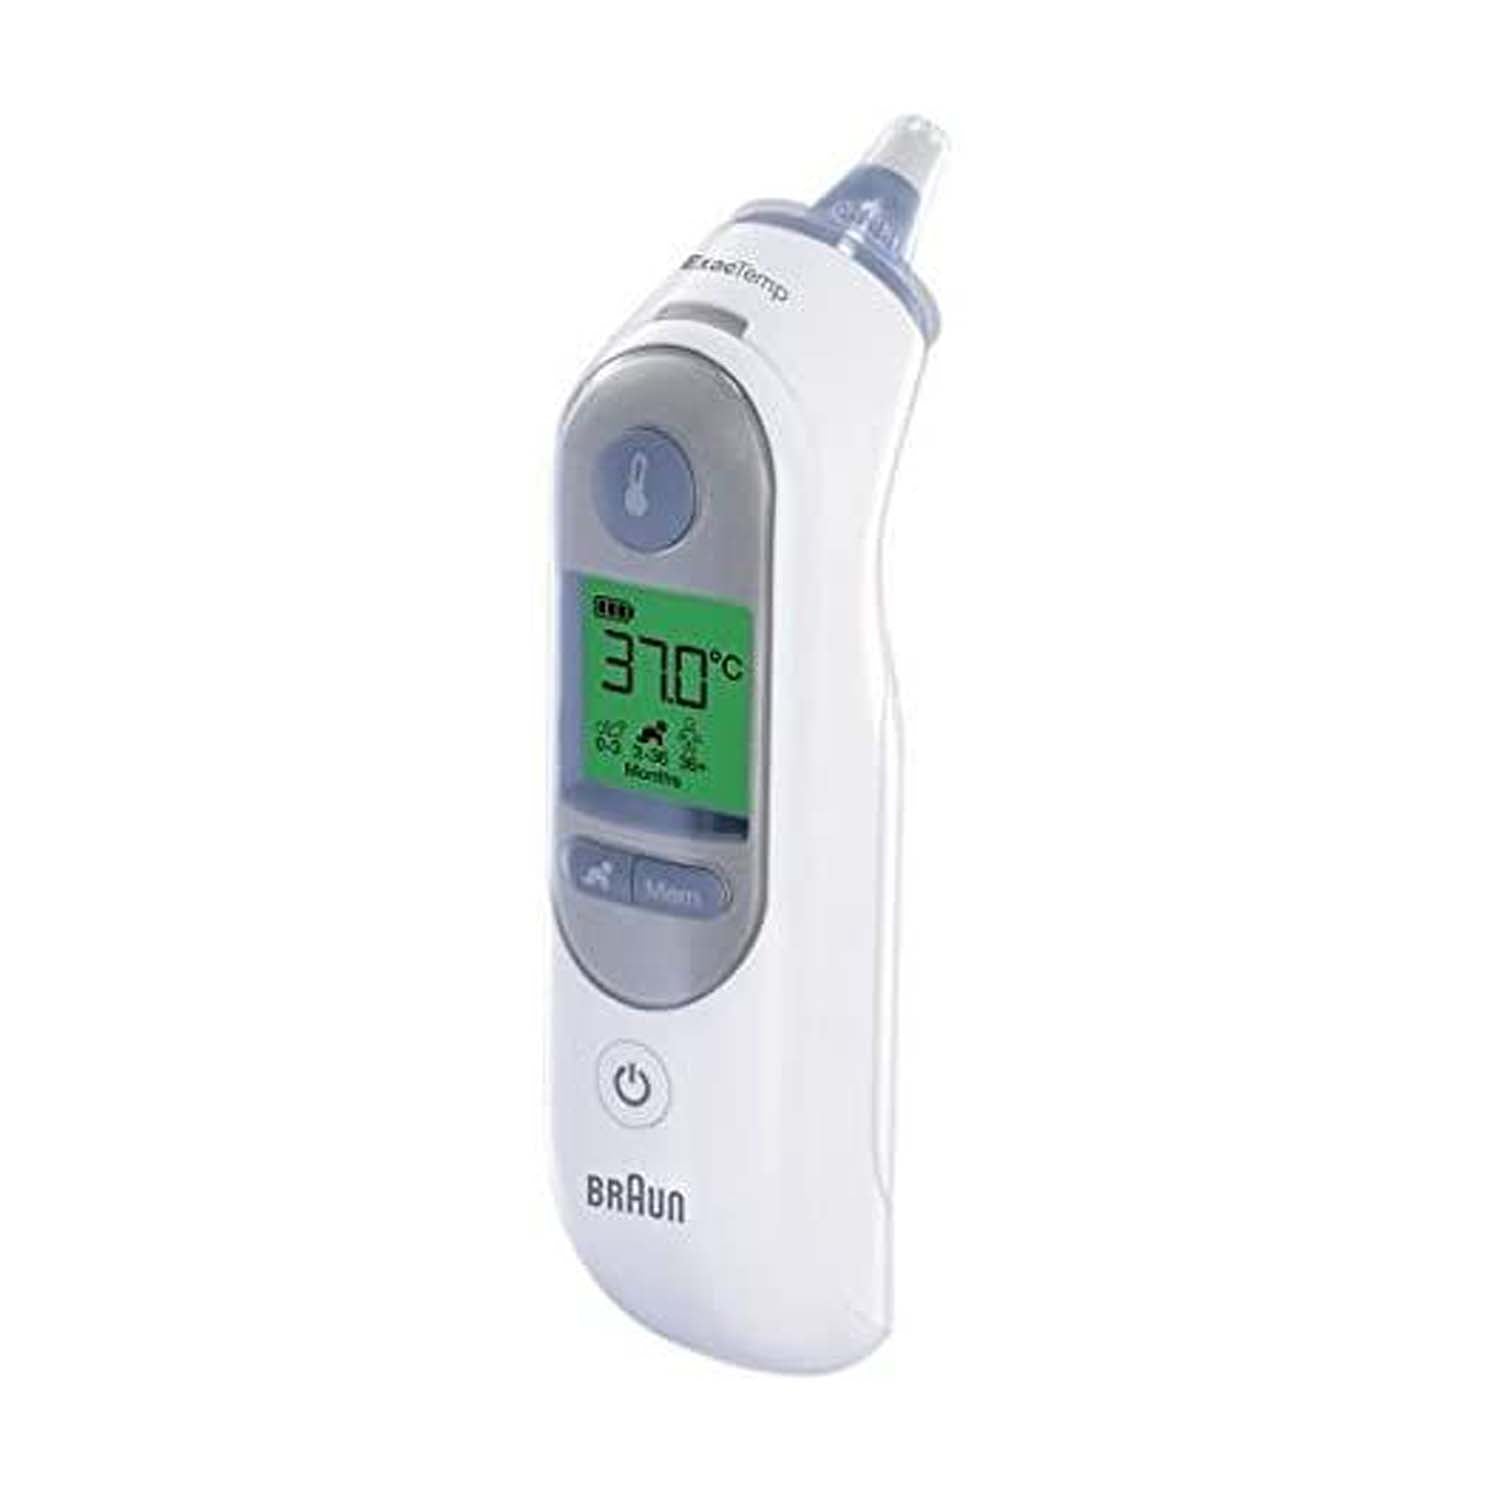 Braun ThermoScan-7 IRT6520 Ear Thermometer